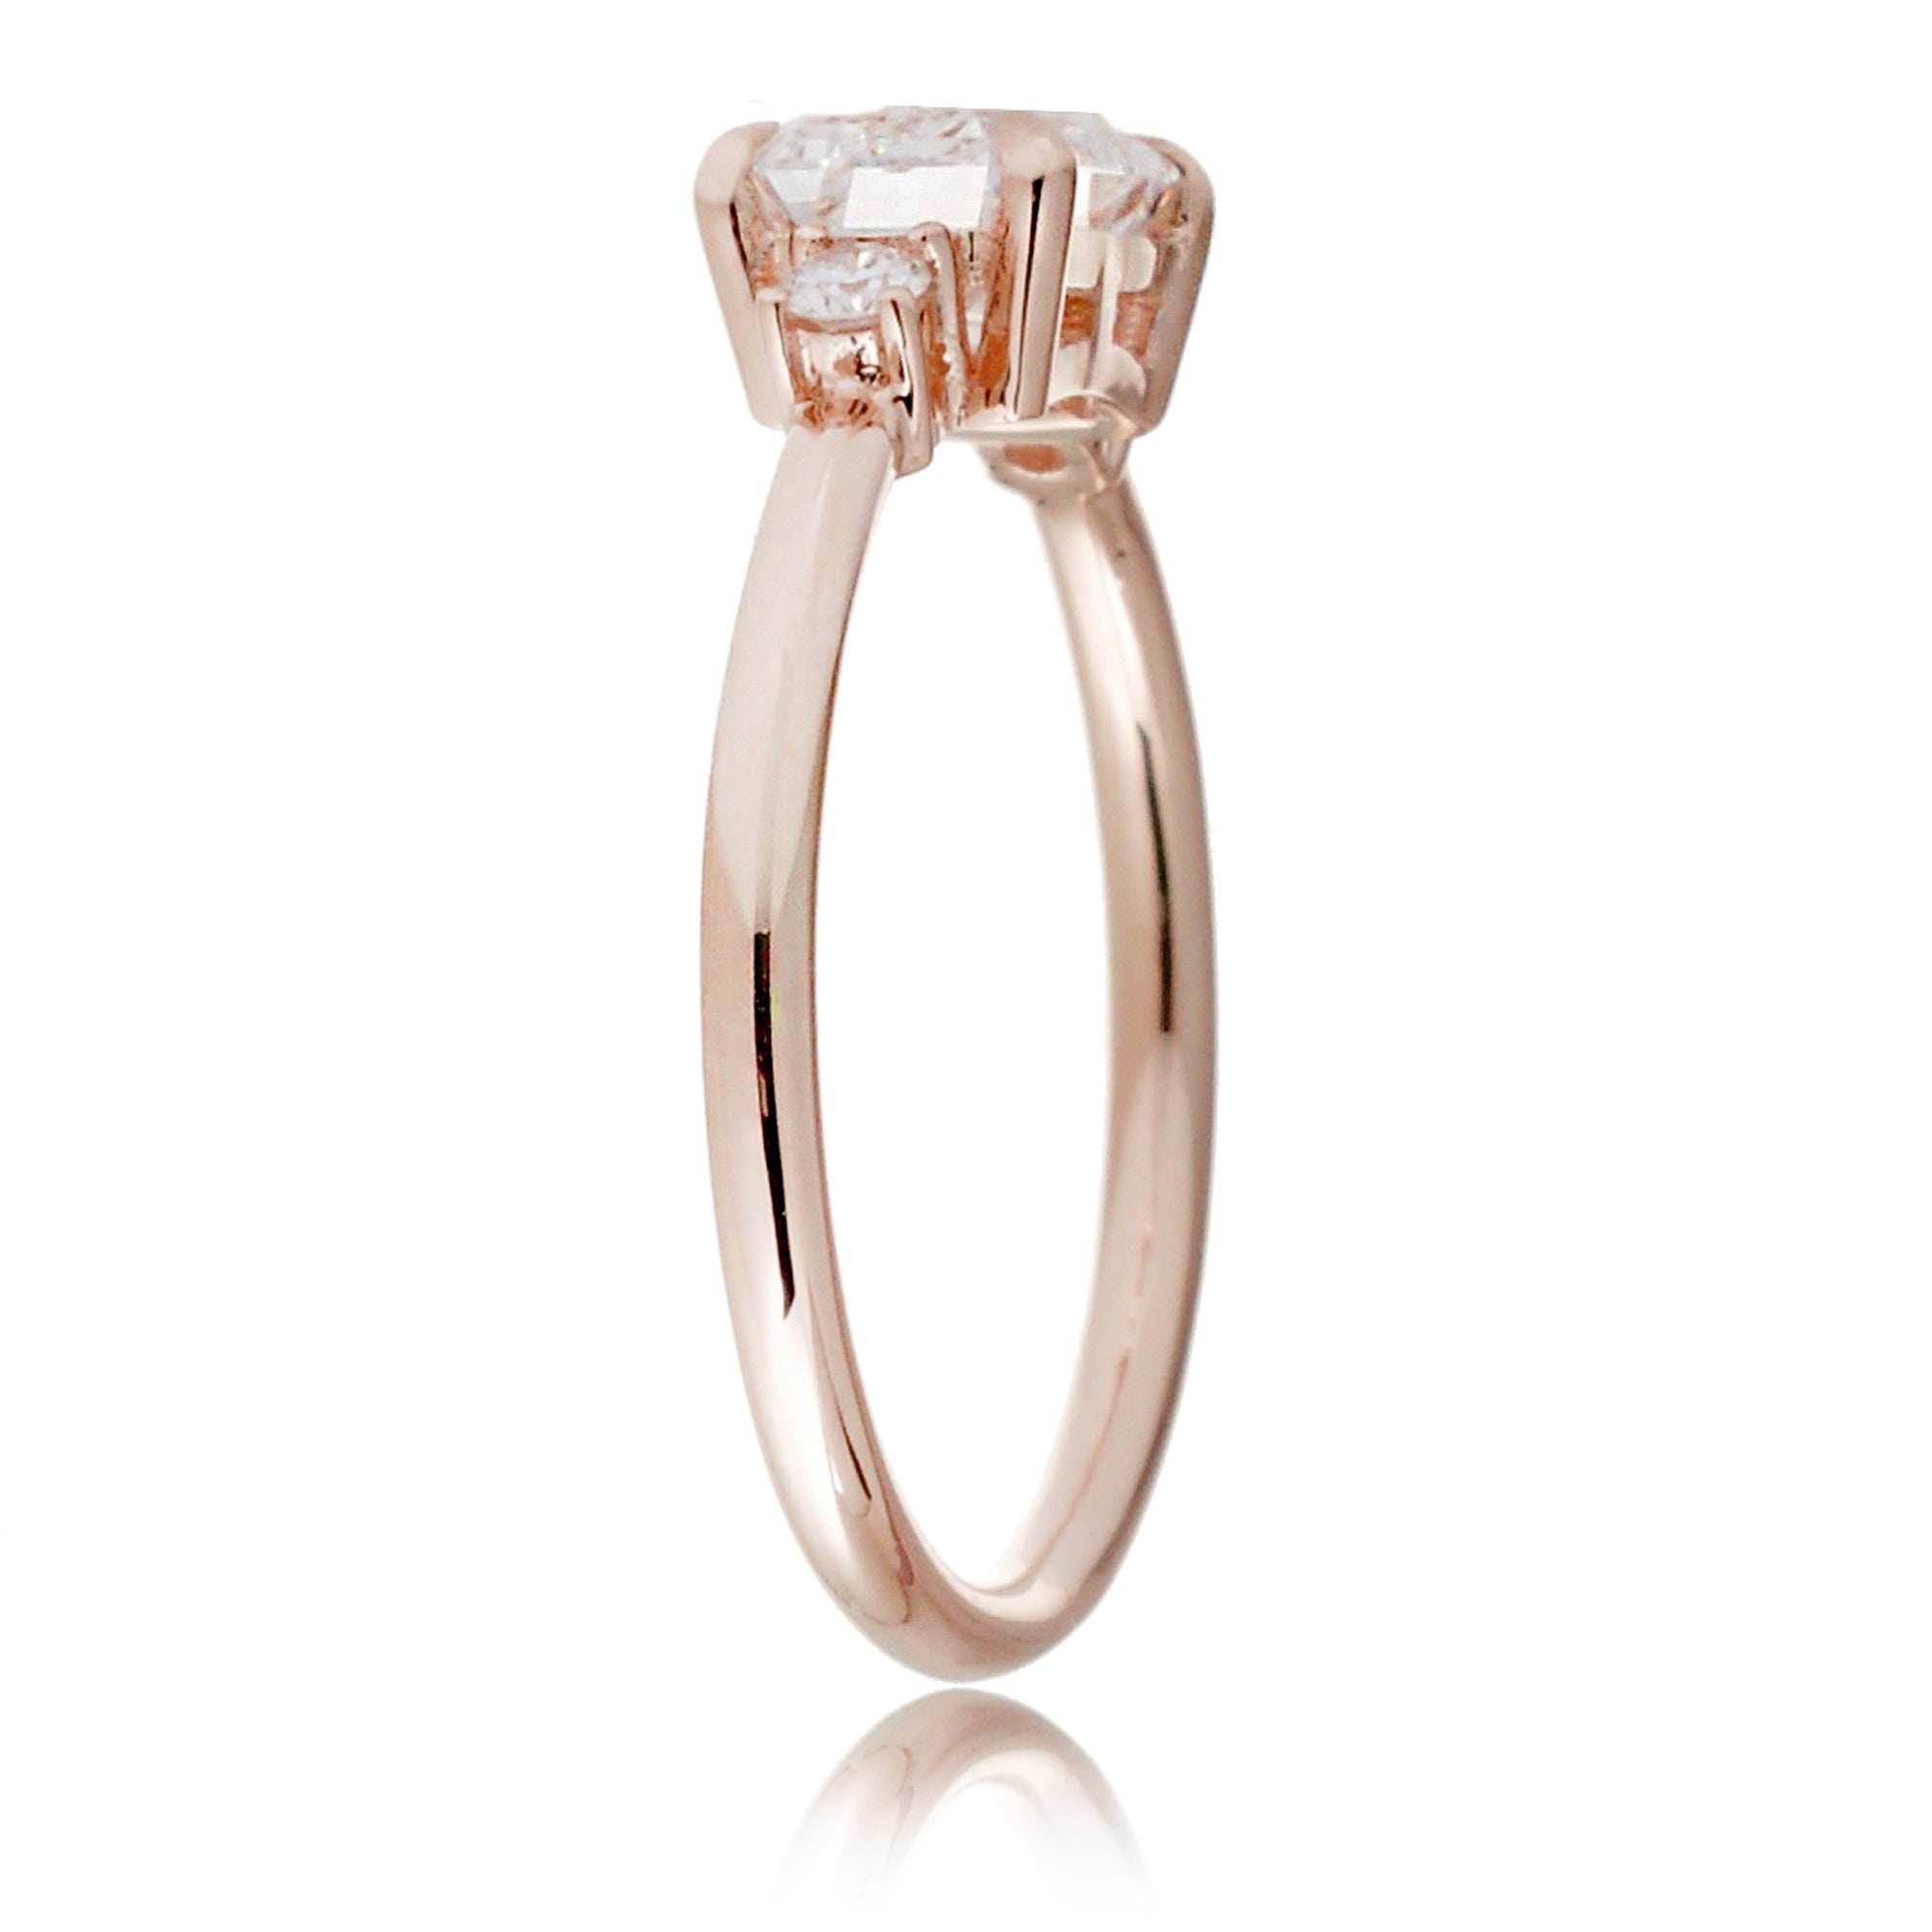 Radiant moissanite three stone east-west ring the Lena rose gold